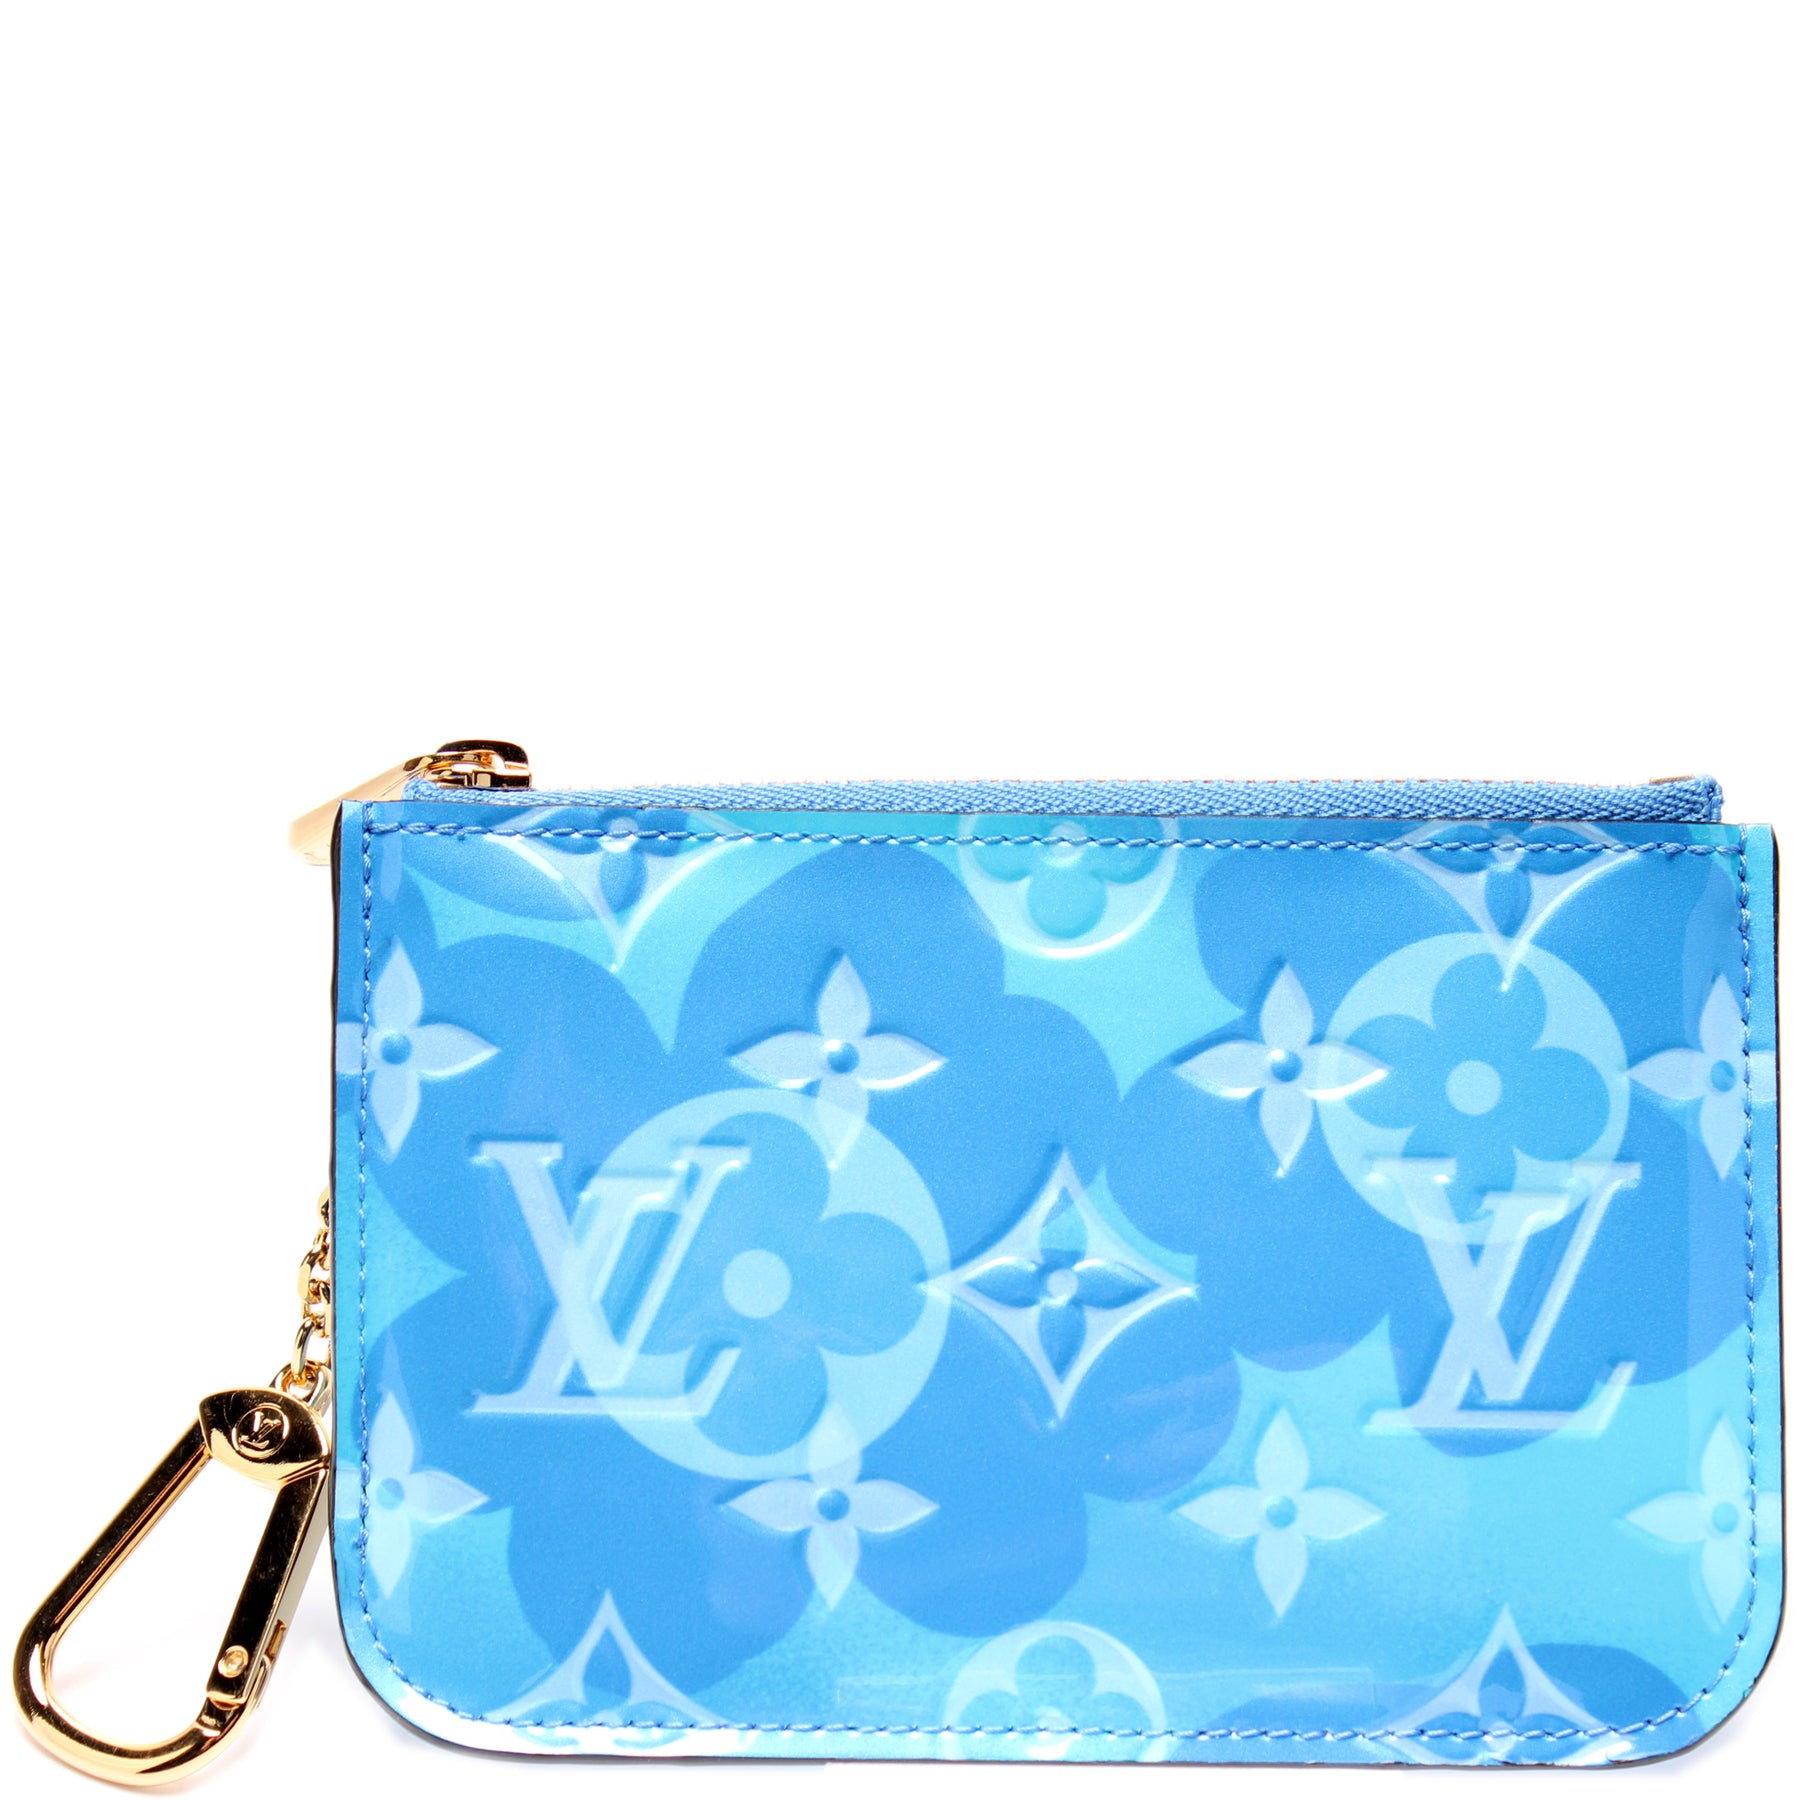 key pouch On Sale - Authenticated Resale